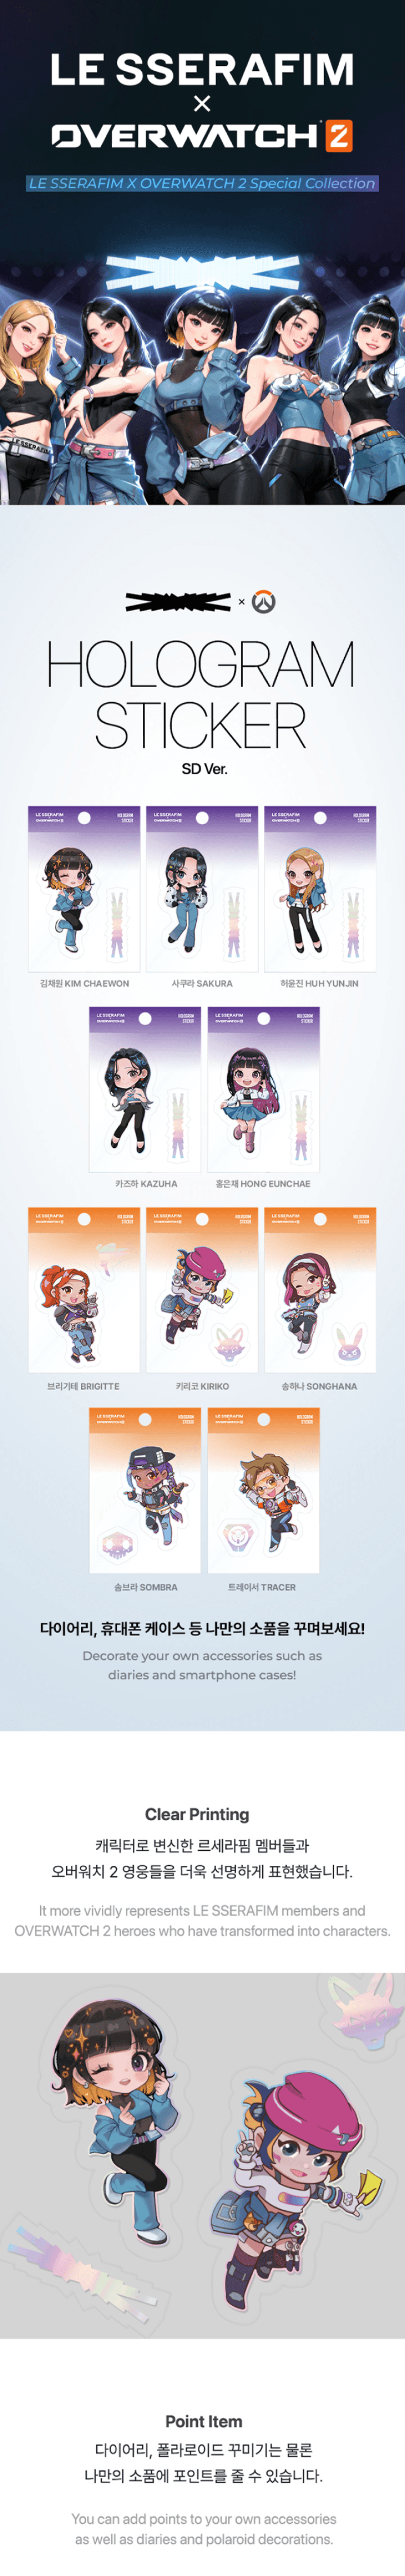 [PRE-ORDER] LE SSERAFIM X OVERWATCH 2 Special Collection - Hologram Sticker SD